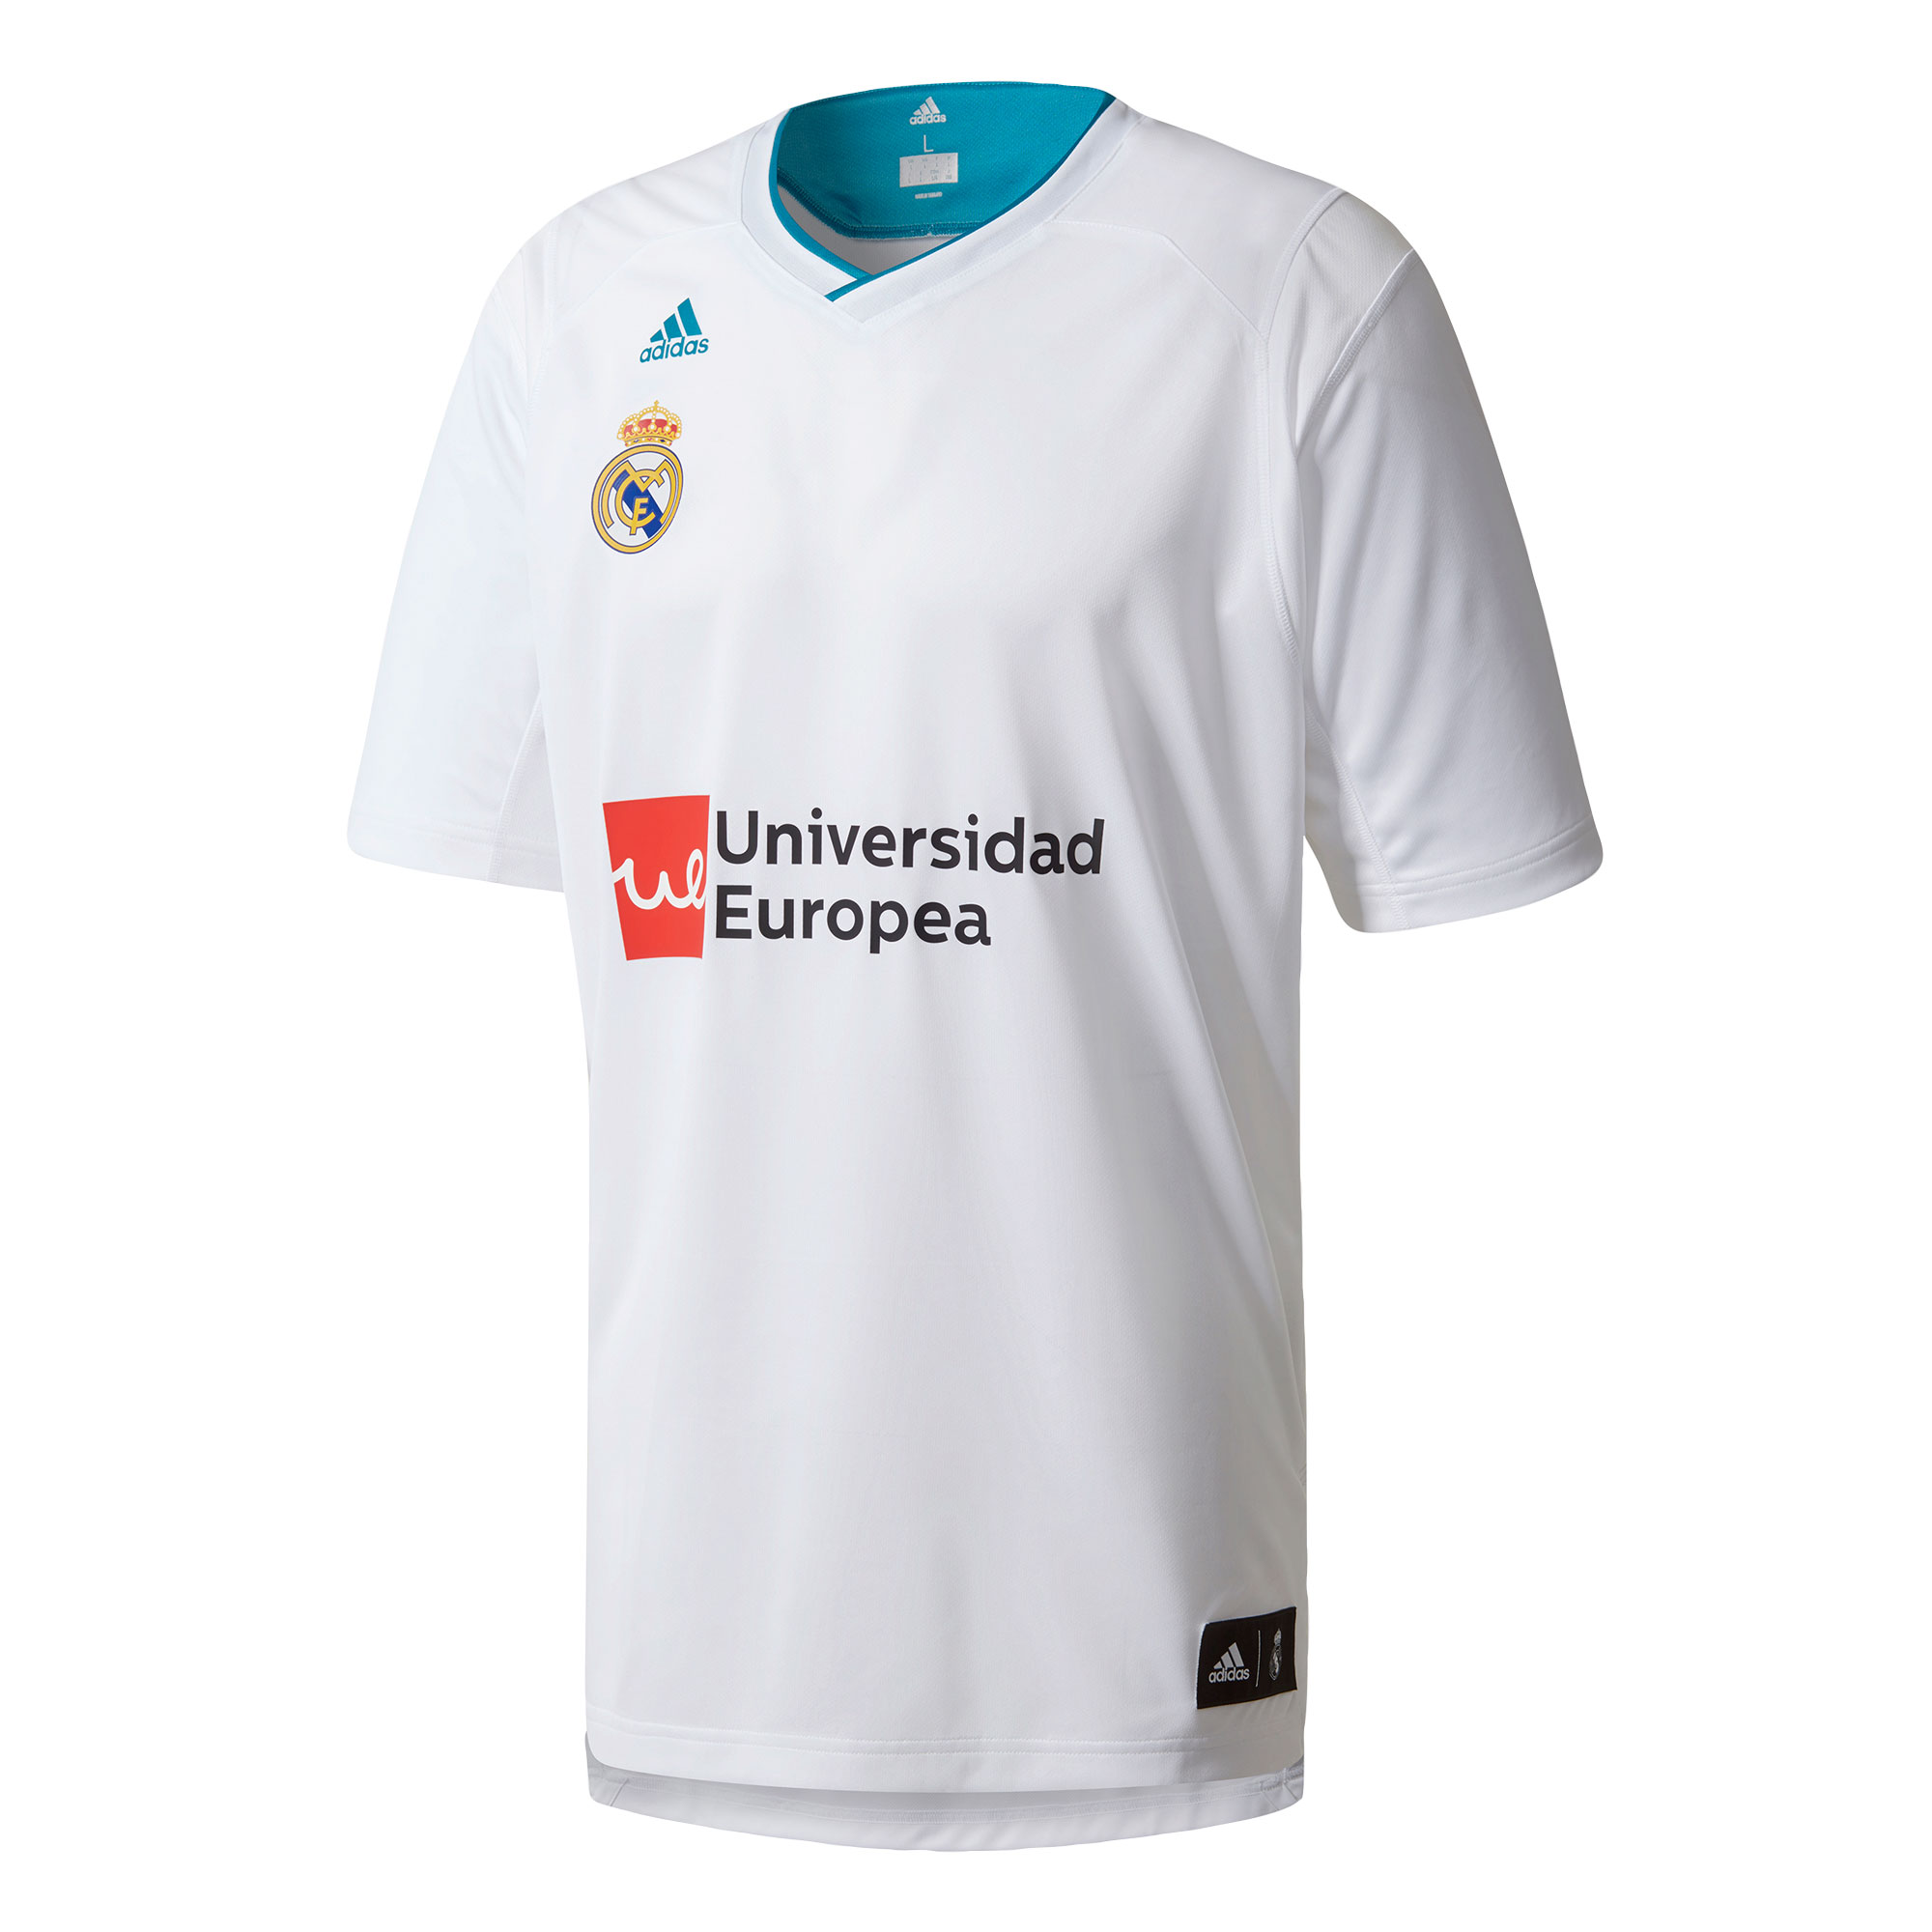 Real Madrid Basketball Jersey - White